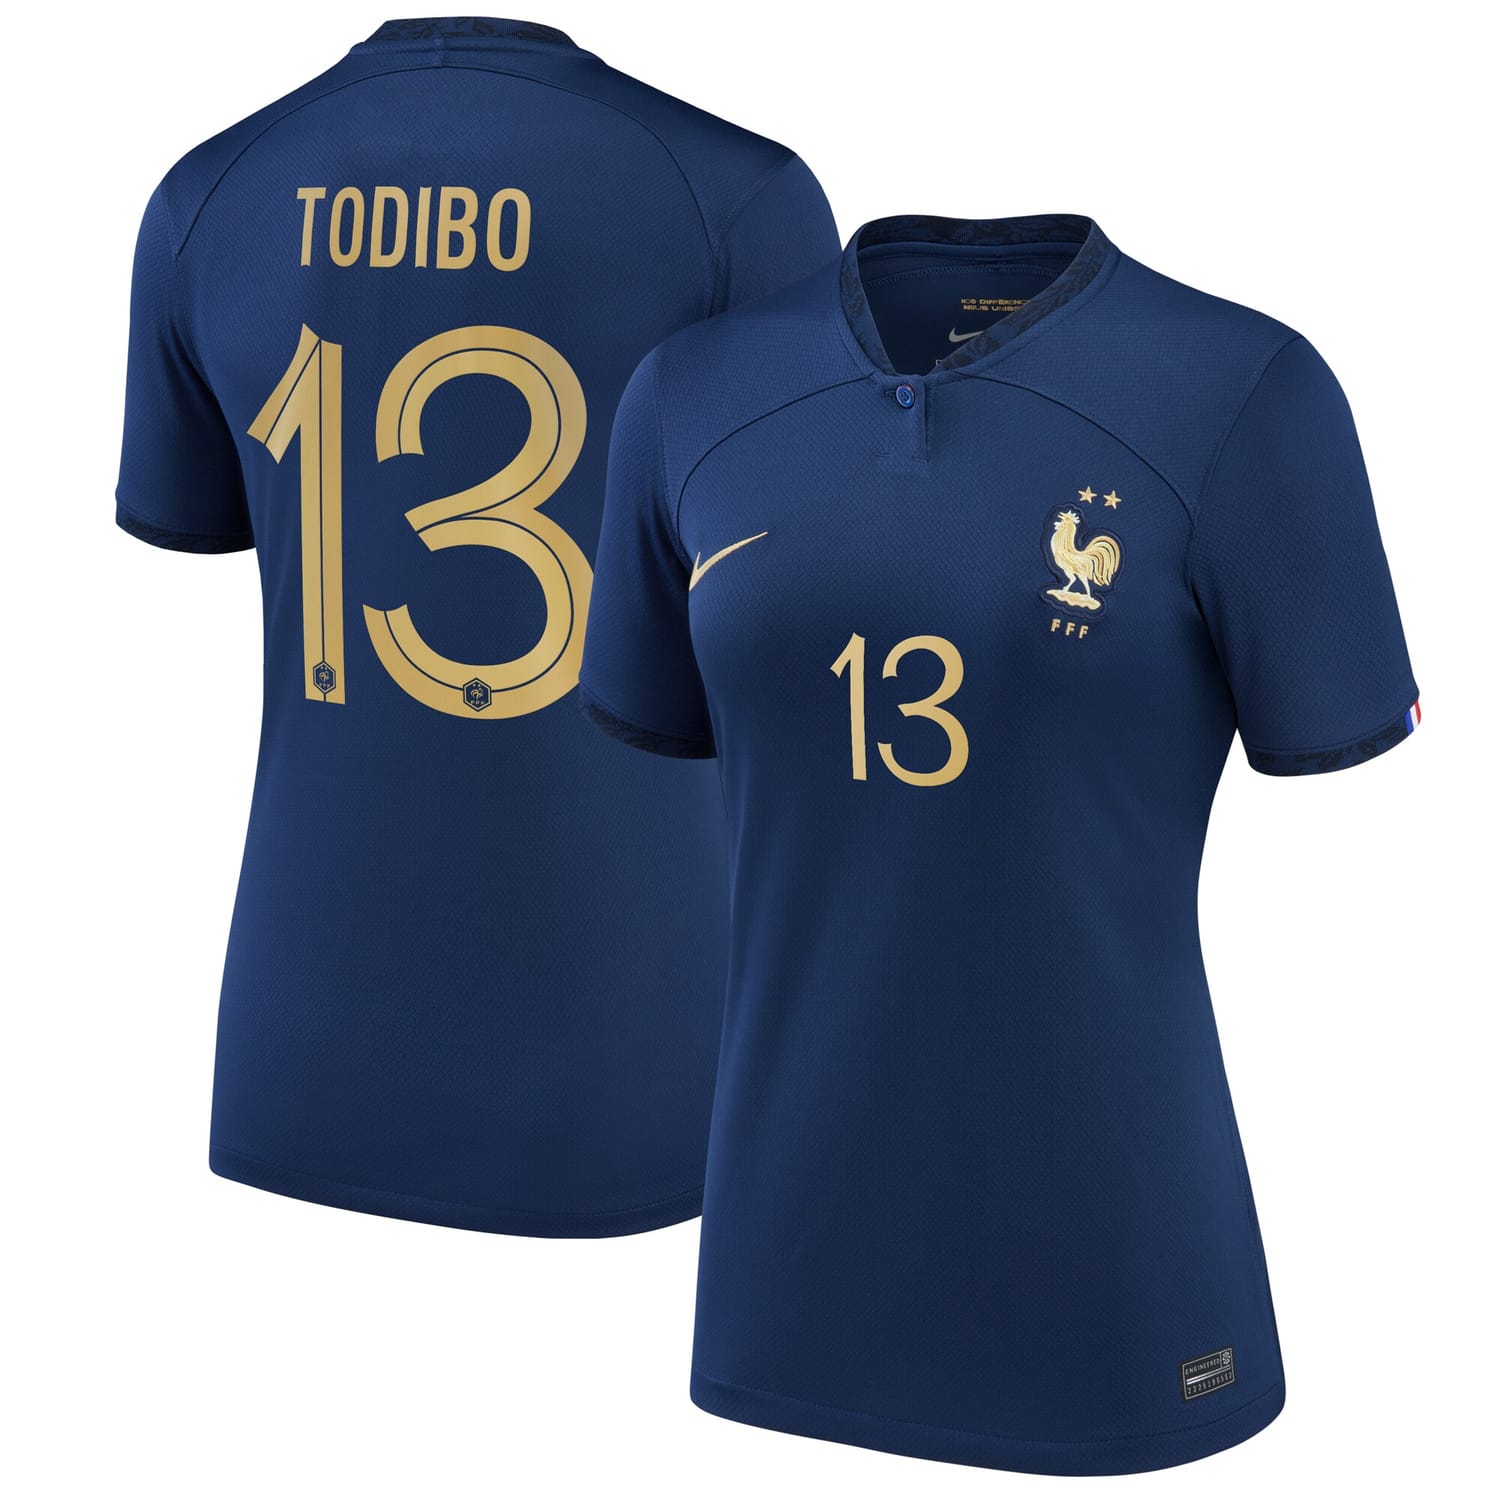 France National Team Home Jersey Shirt 2022 player Jean-Clair Todibo 13 printing for Women